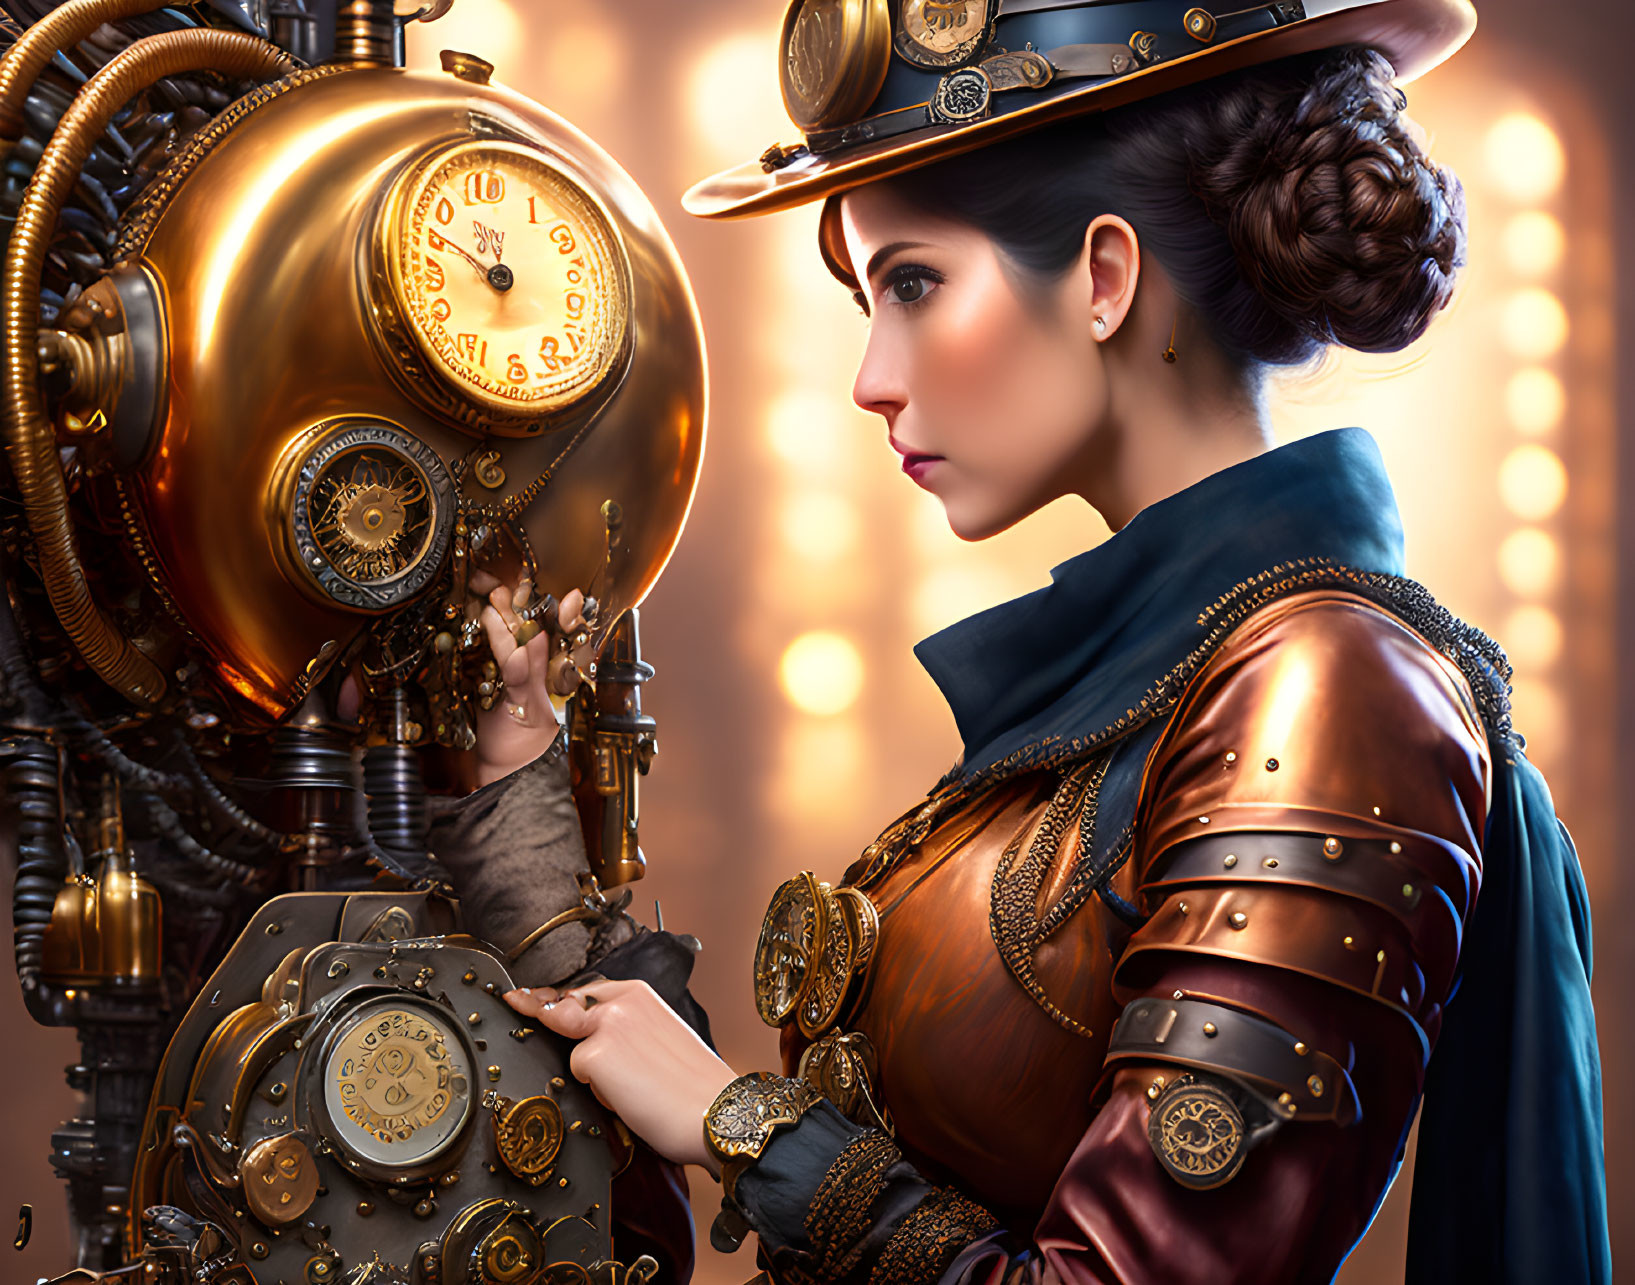 Steampunk-themed woman in top hat with intricate machinery and vintage aesthetic